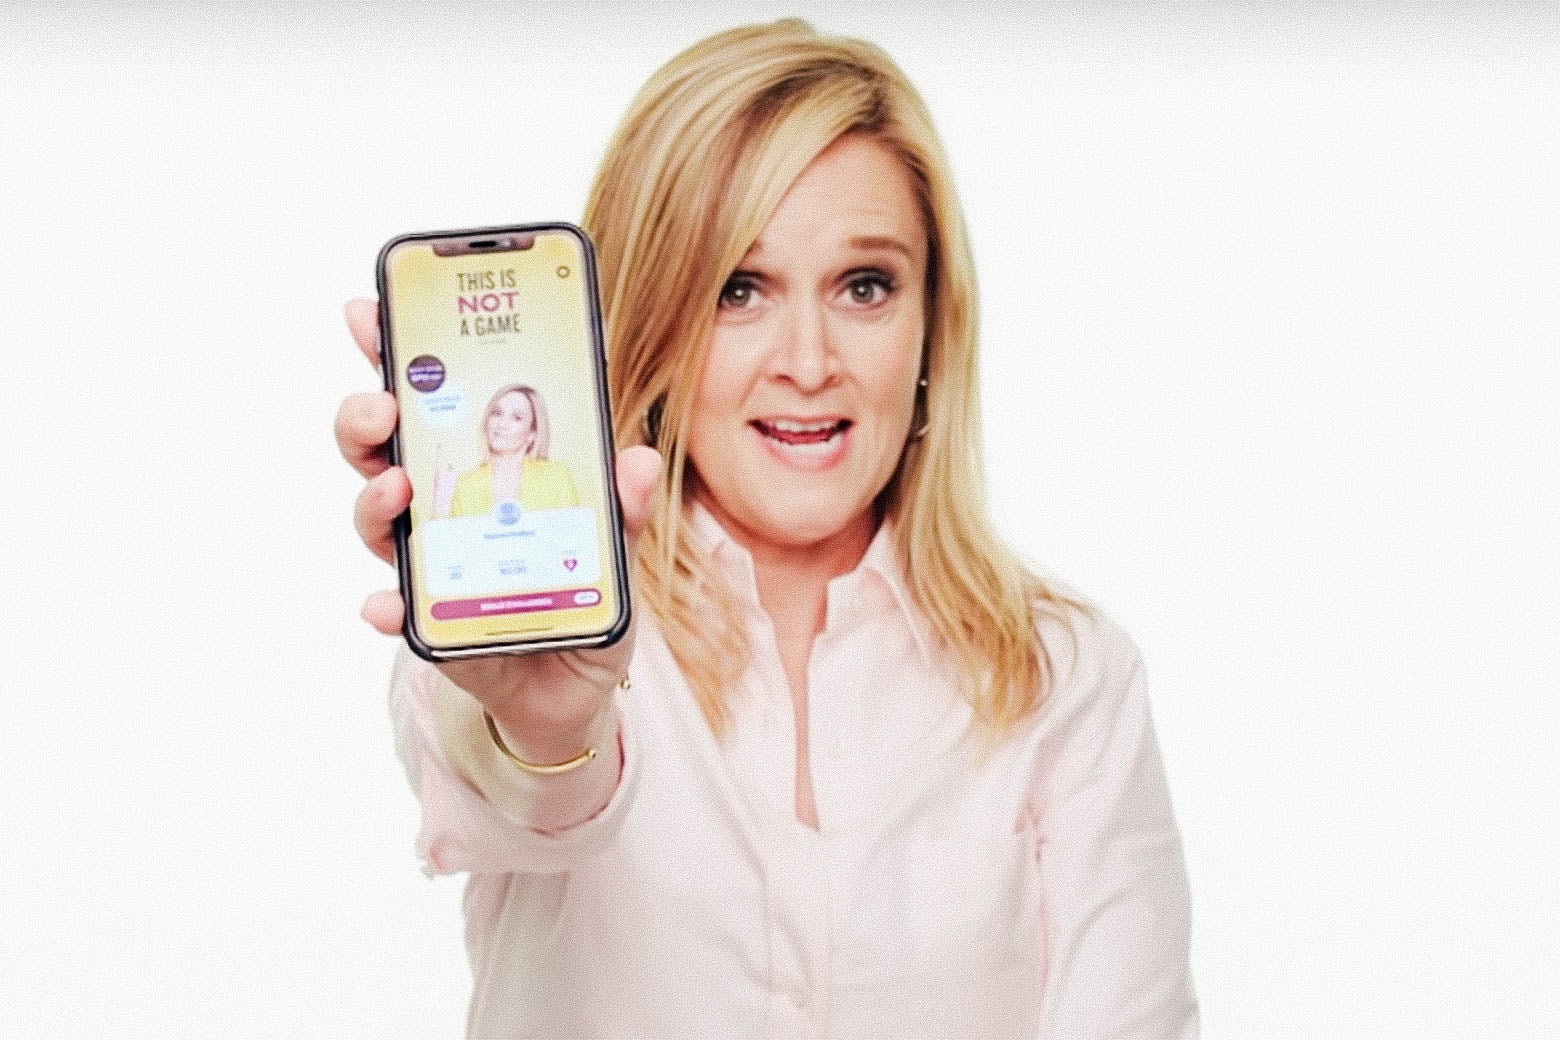 Midterm elections: Full Frontal's Samantha Bee introduces trivia app This Is Not a Game.1560 x 1040